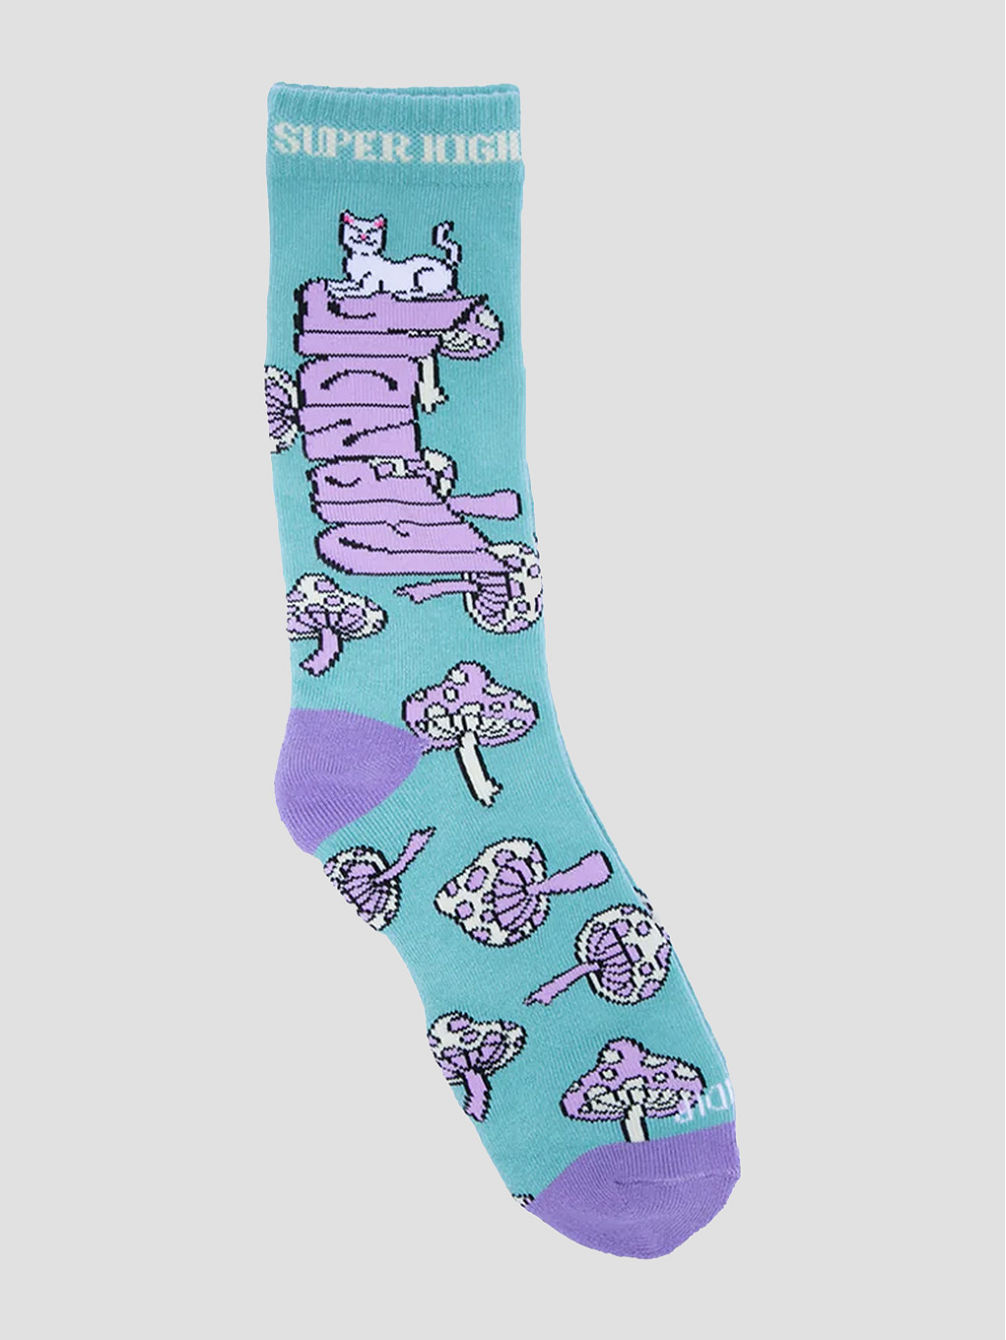 Super Psychedelic Calcetines